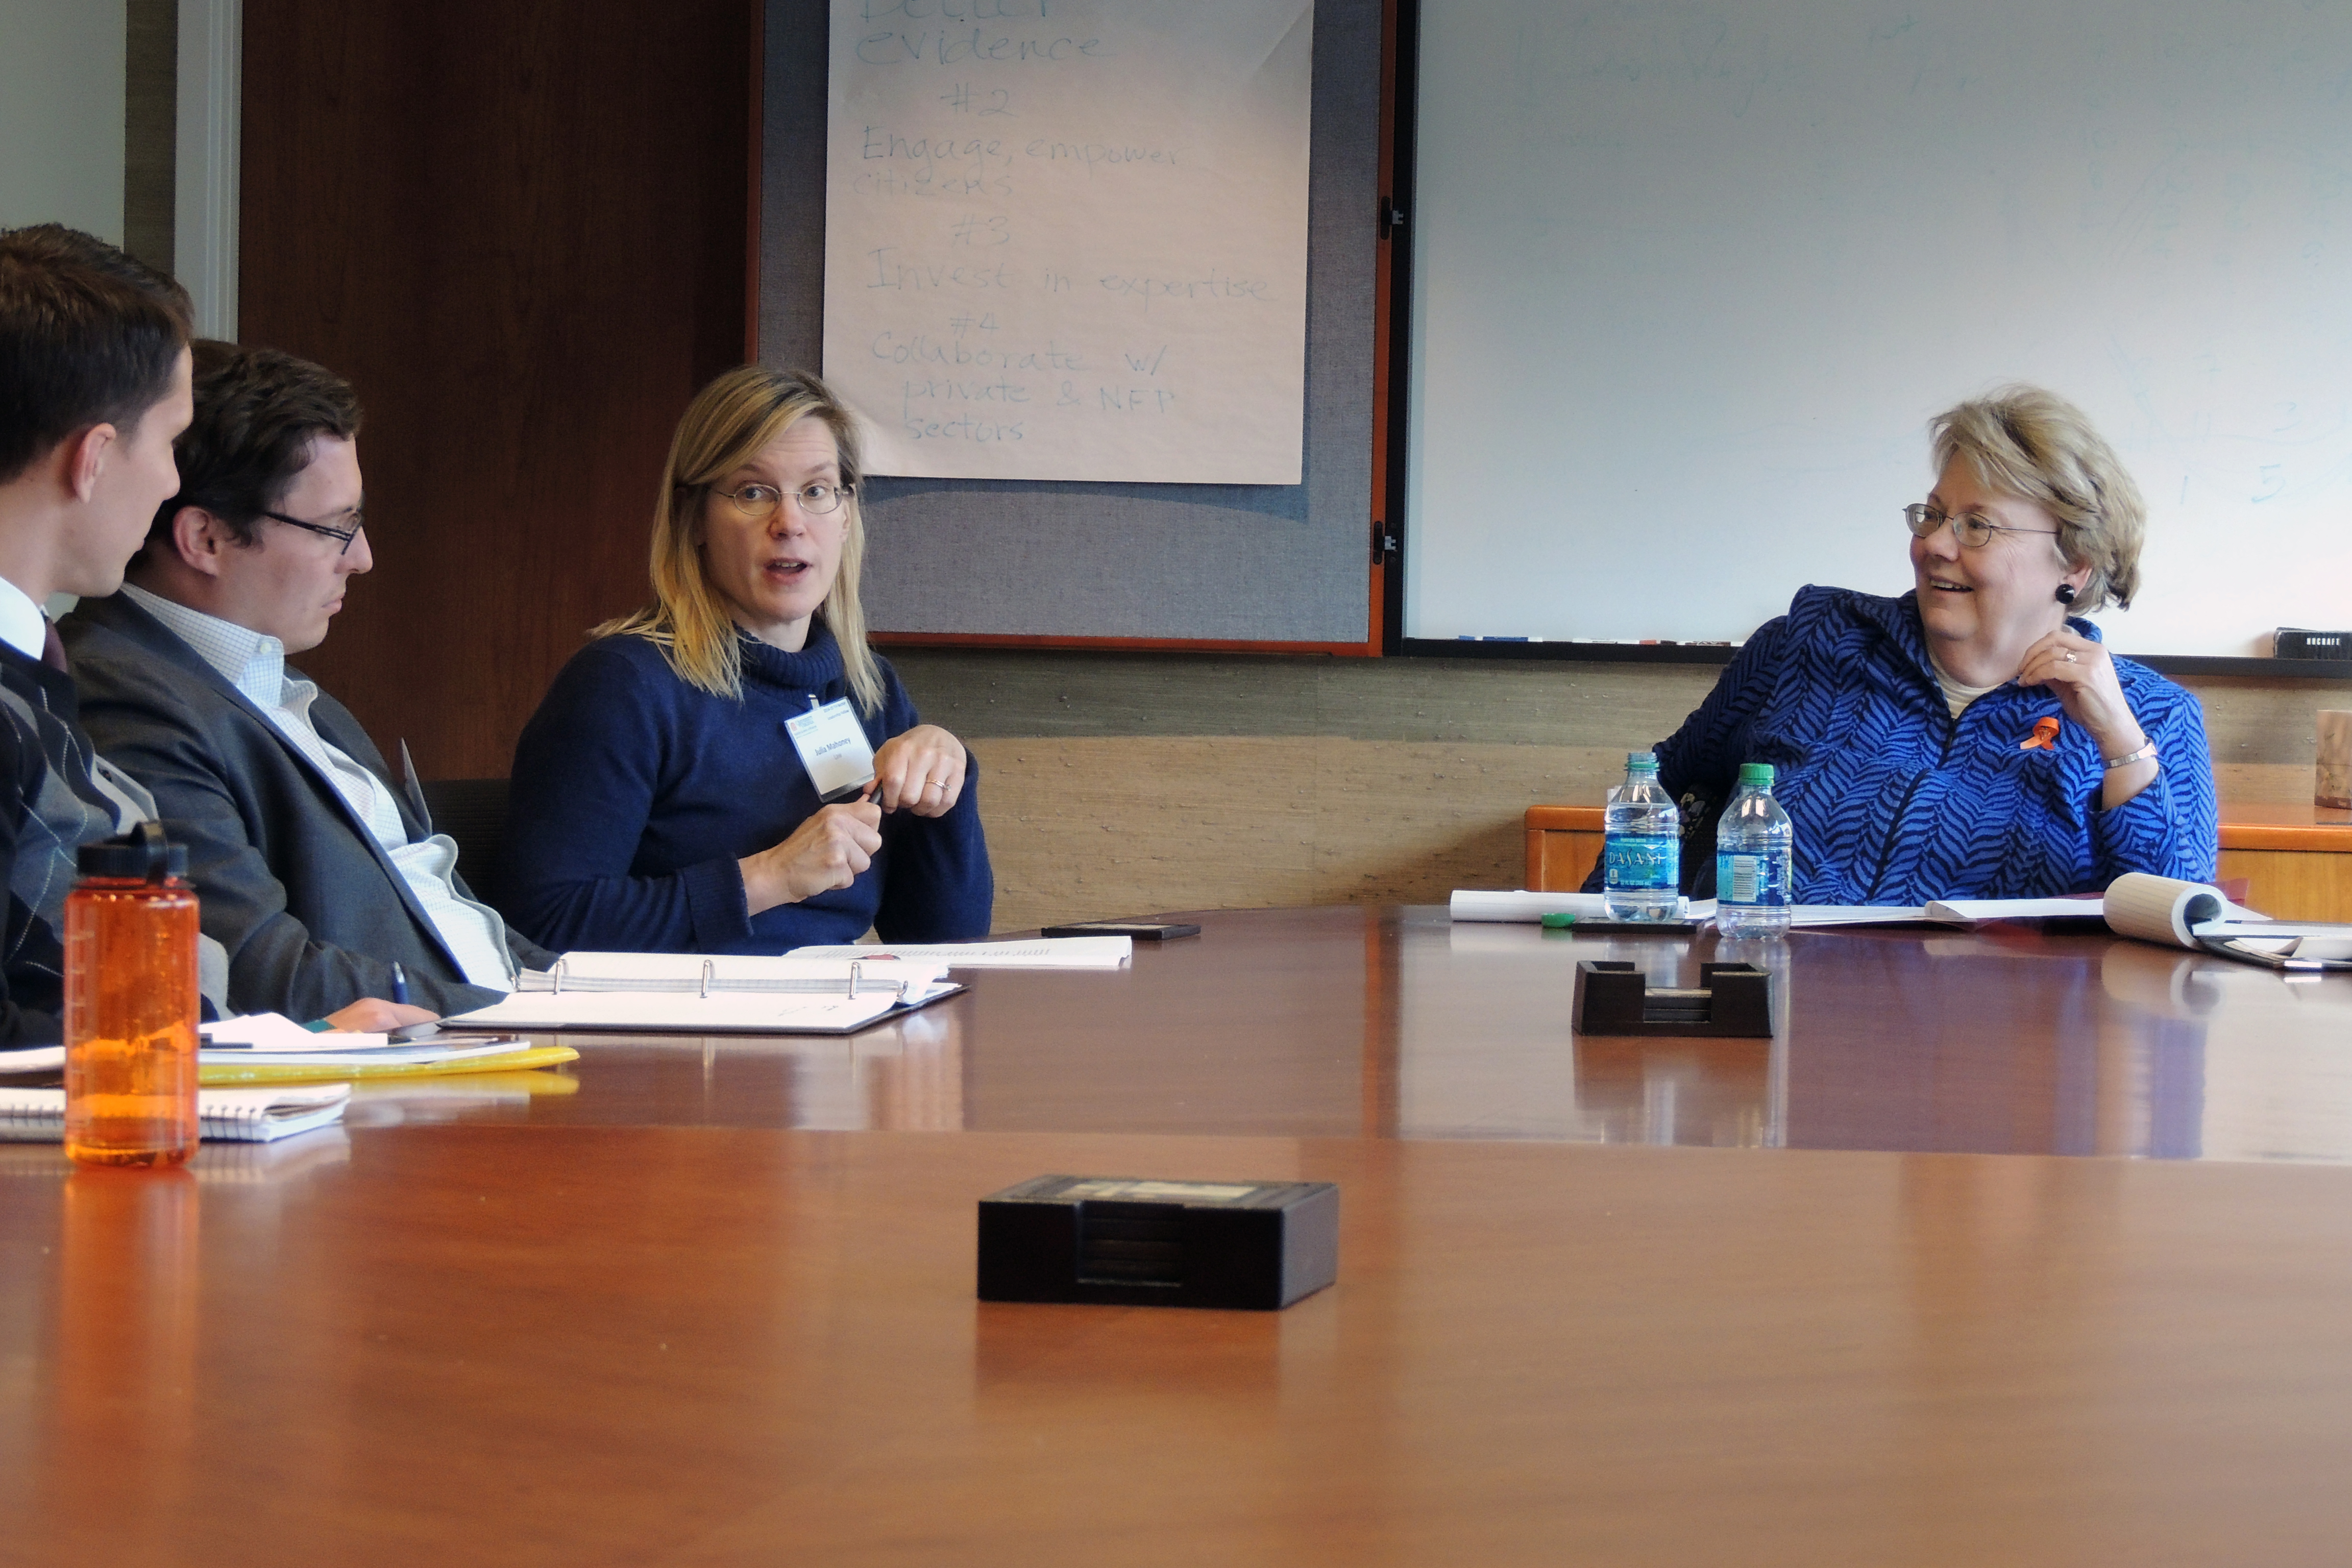 President Sullivan (right) and law professor Julia Mahoney (center) talking to a group of people